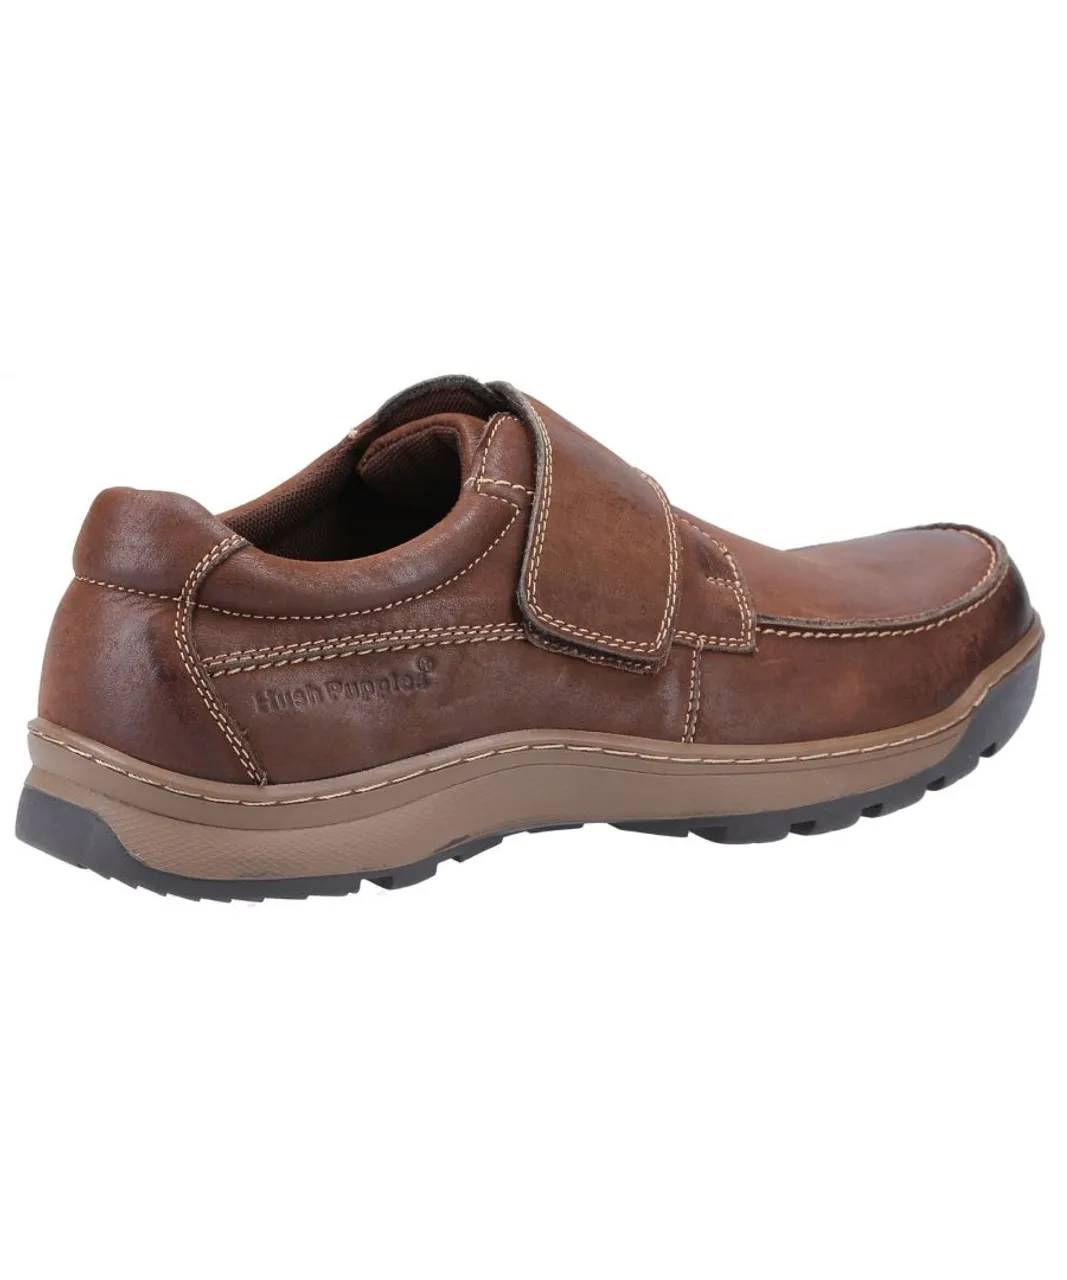 Hush Puppies Casper Touch Fastening Mens Shoes - Brown Leather